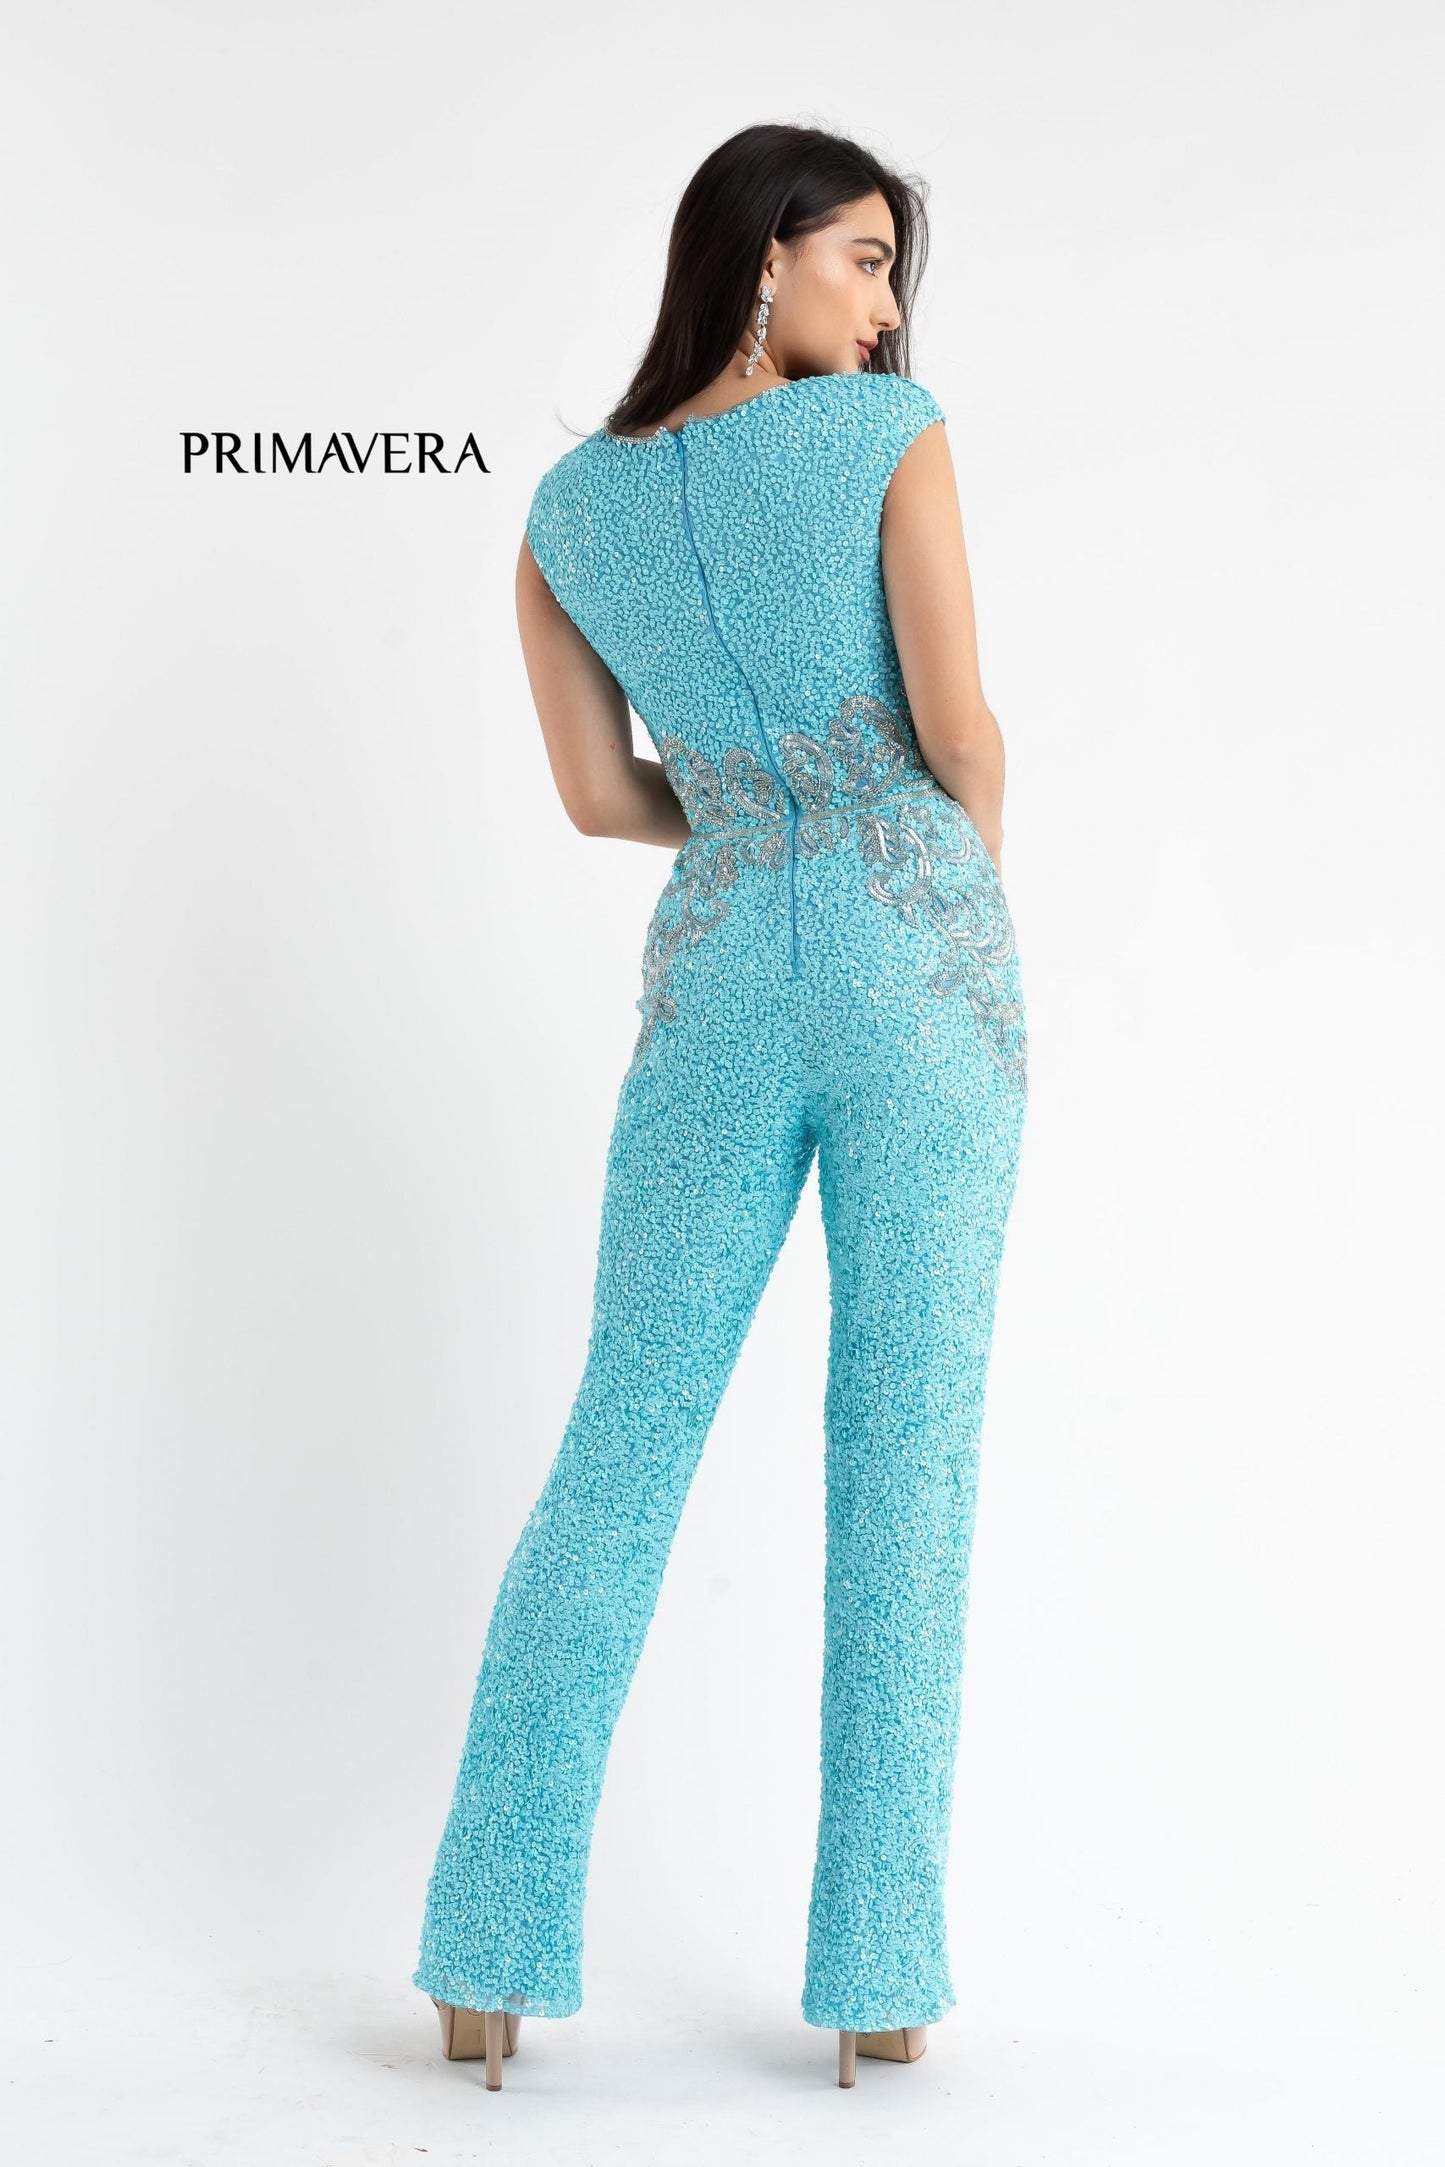 Primavera Couture 3775 Size 00, 4 Royal Blue Sequined Jumpsuit Beaded Waist and Hips Cap Sleeves